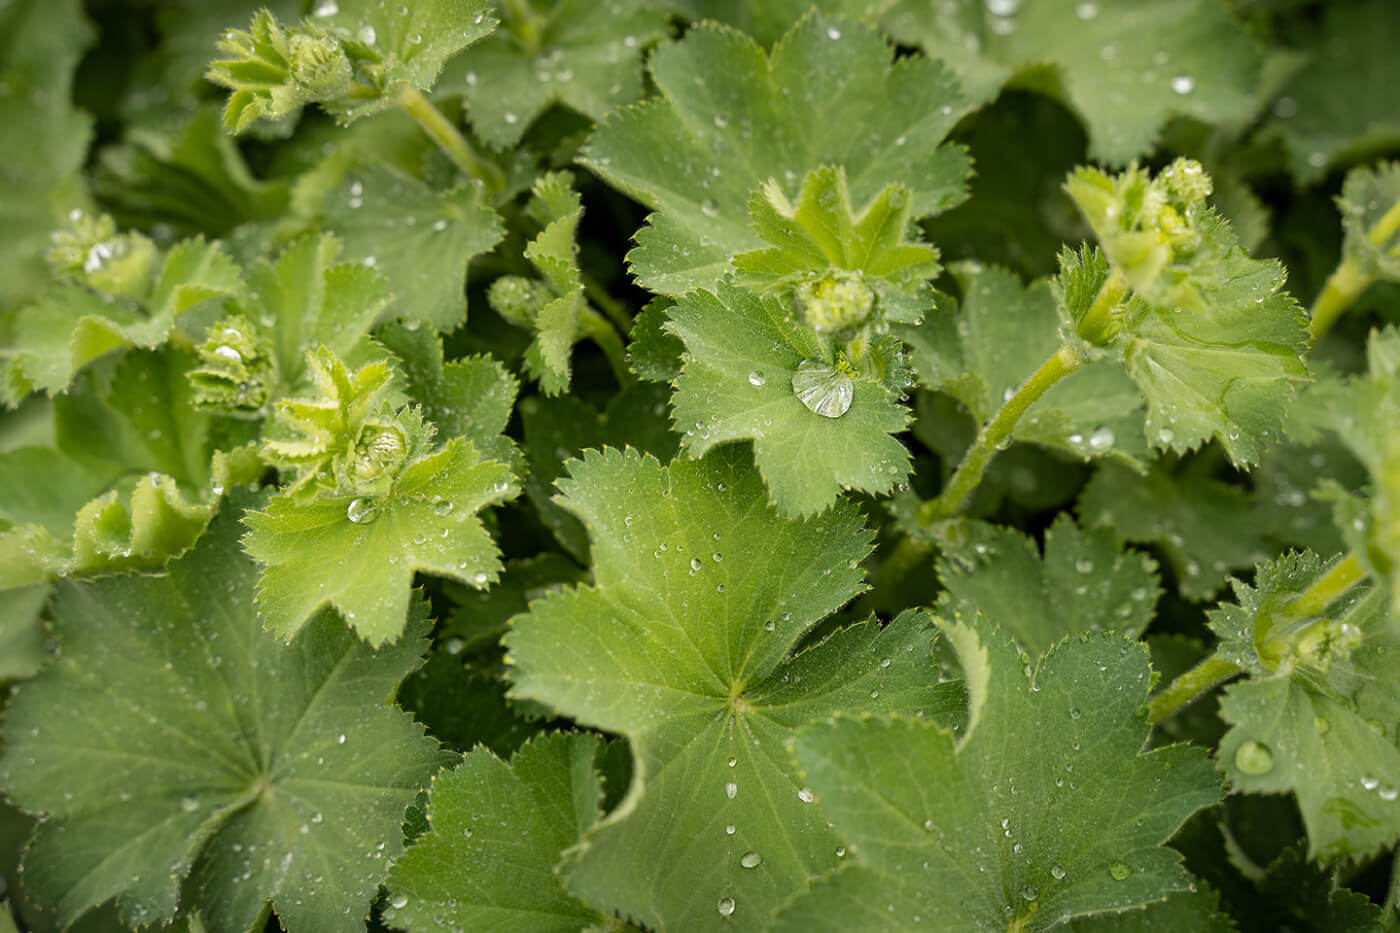 Water droplets on Lady's Mantle foliage